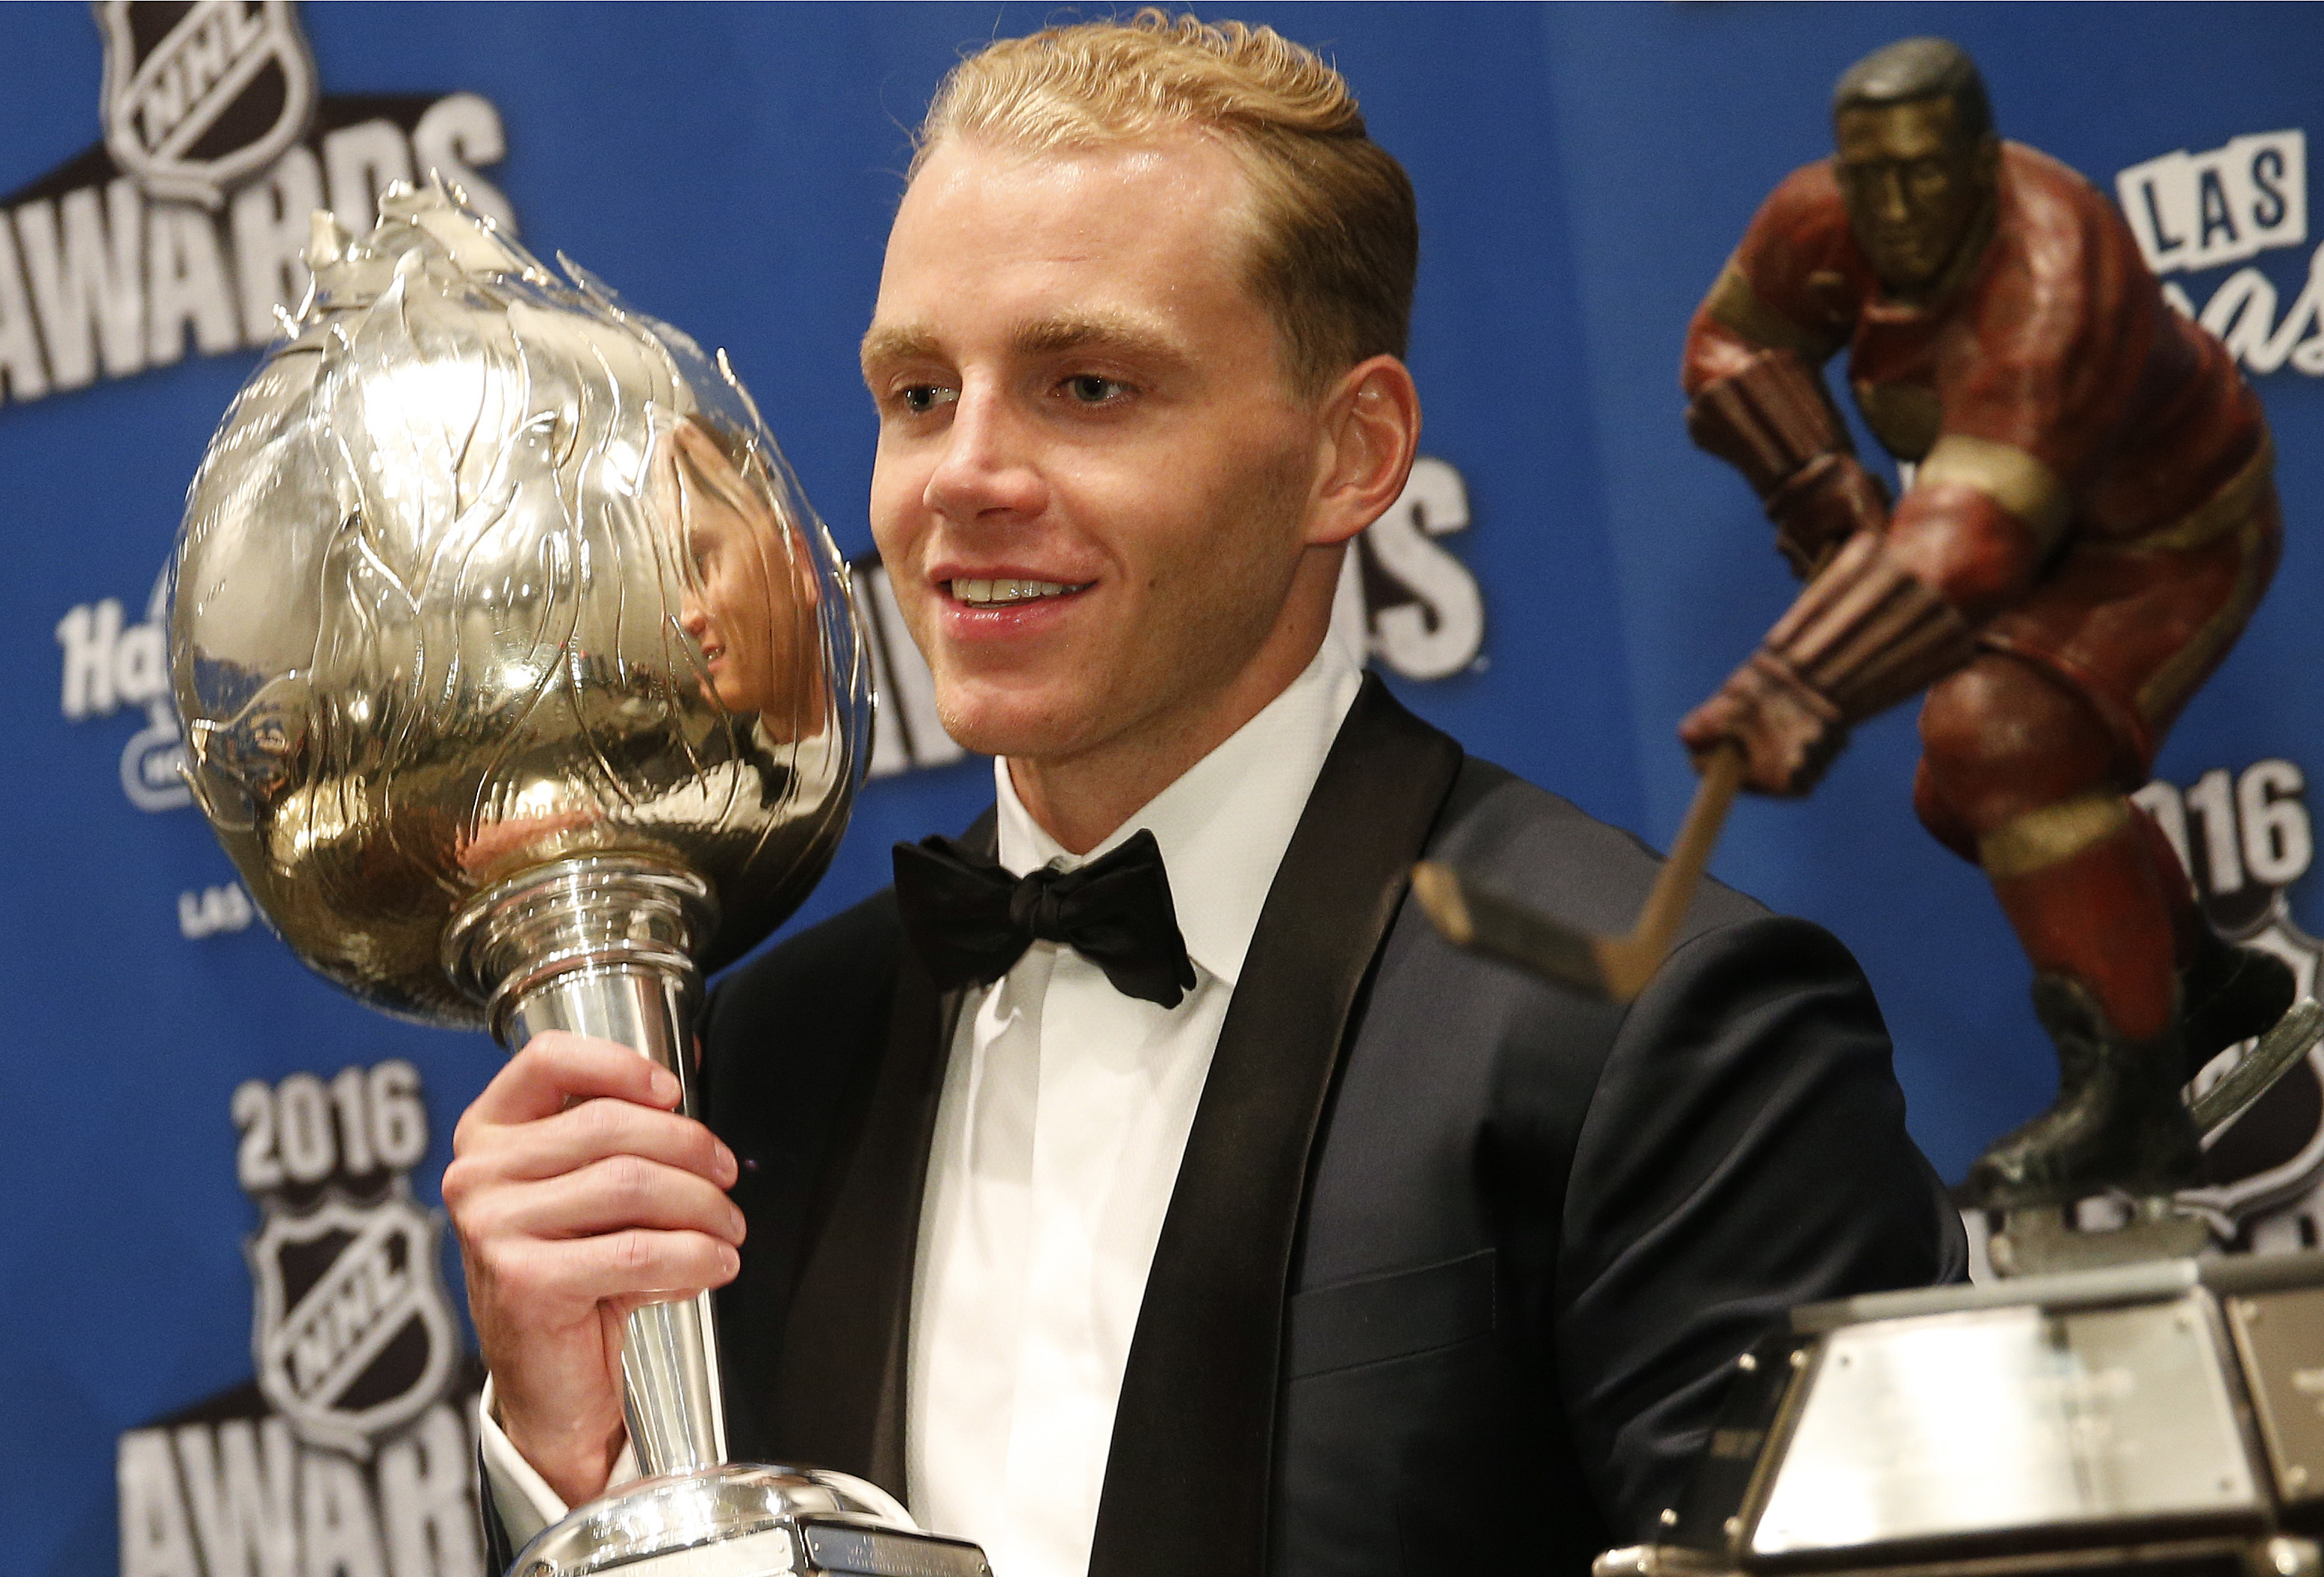 Chicago’s Patrick Kane wins the Hart Trophy as NHL MVP The Daily